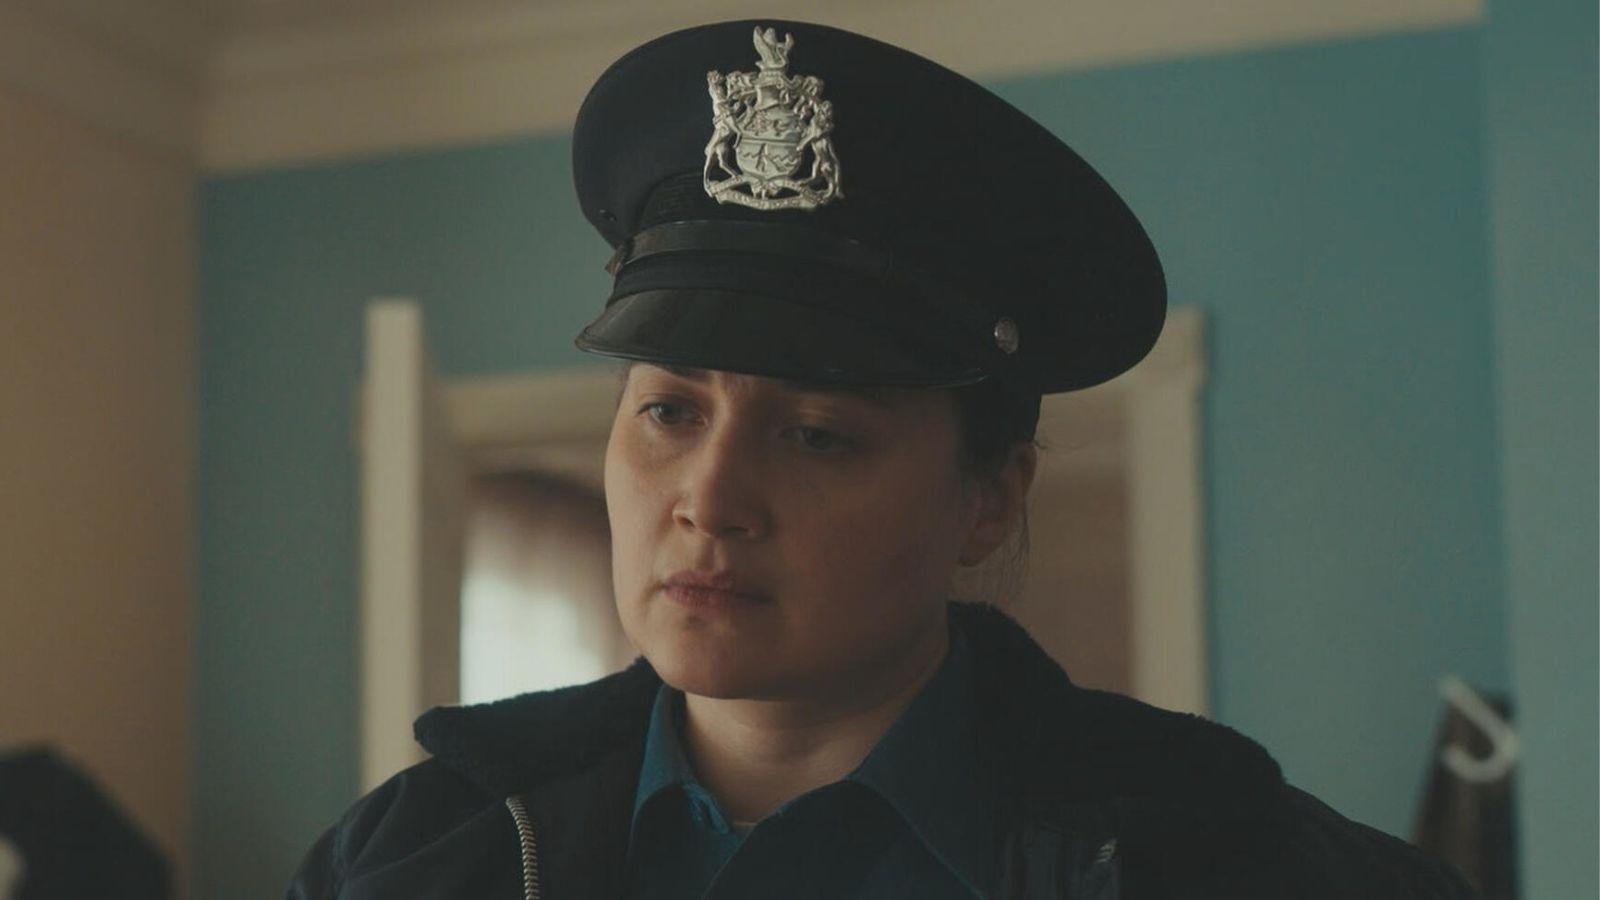 Lily Gladstone in Under the Bridge stands in a home in her police uniform.